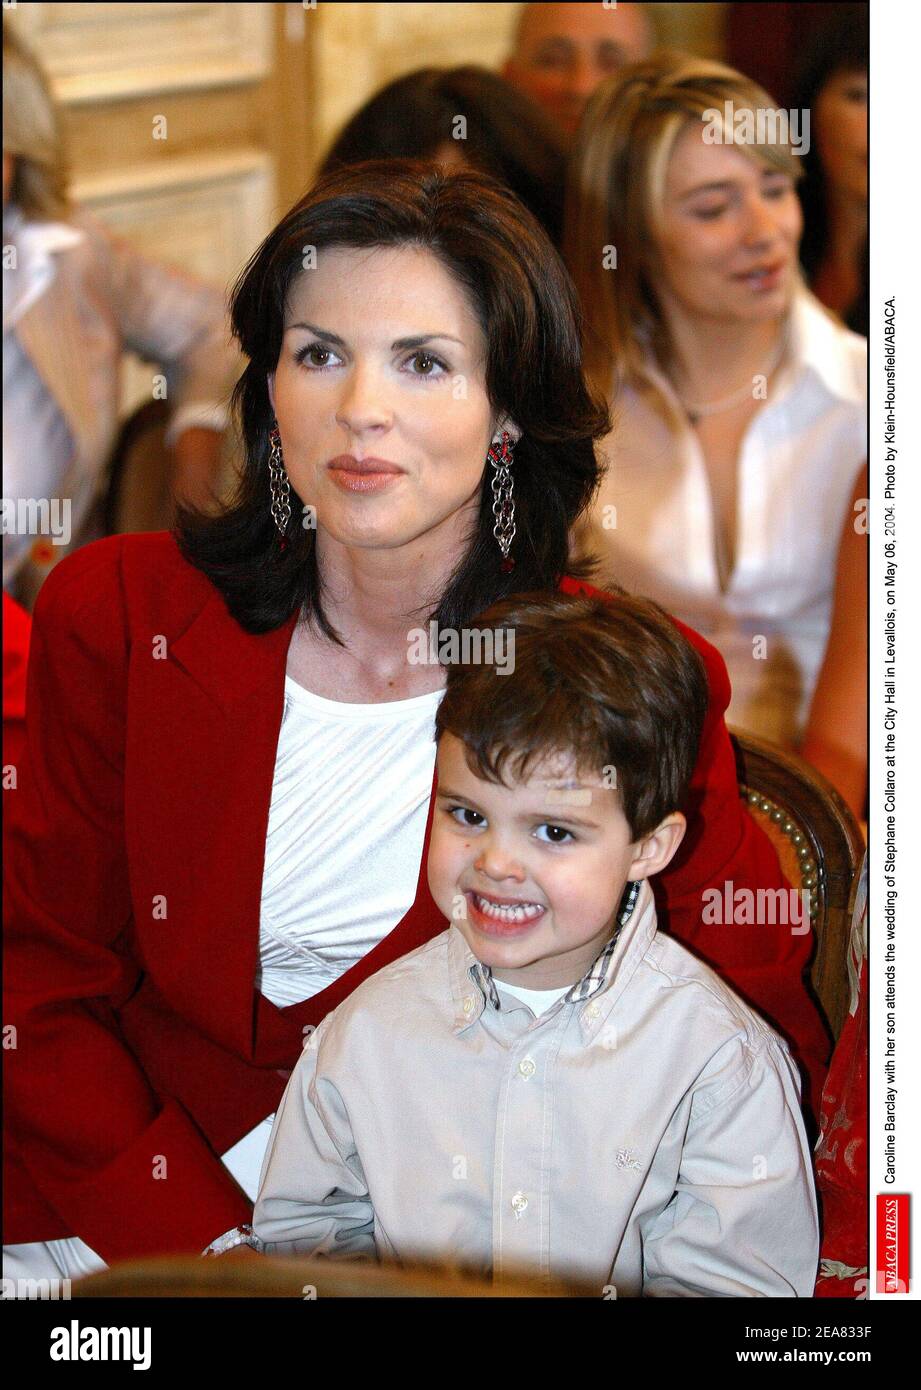 Caroline Barclay with her son attends the wedding of Stephane Collaro at the City Hall in Levallois, on May 06, 2004. Photo by Klein-Hounsfield/ABACA. Stock Photo